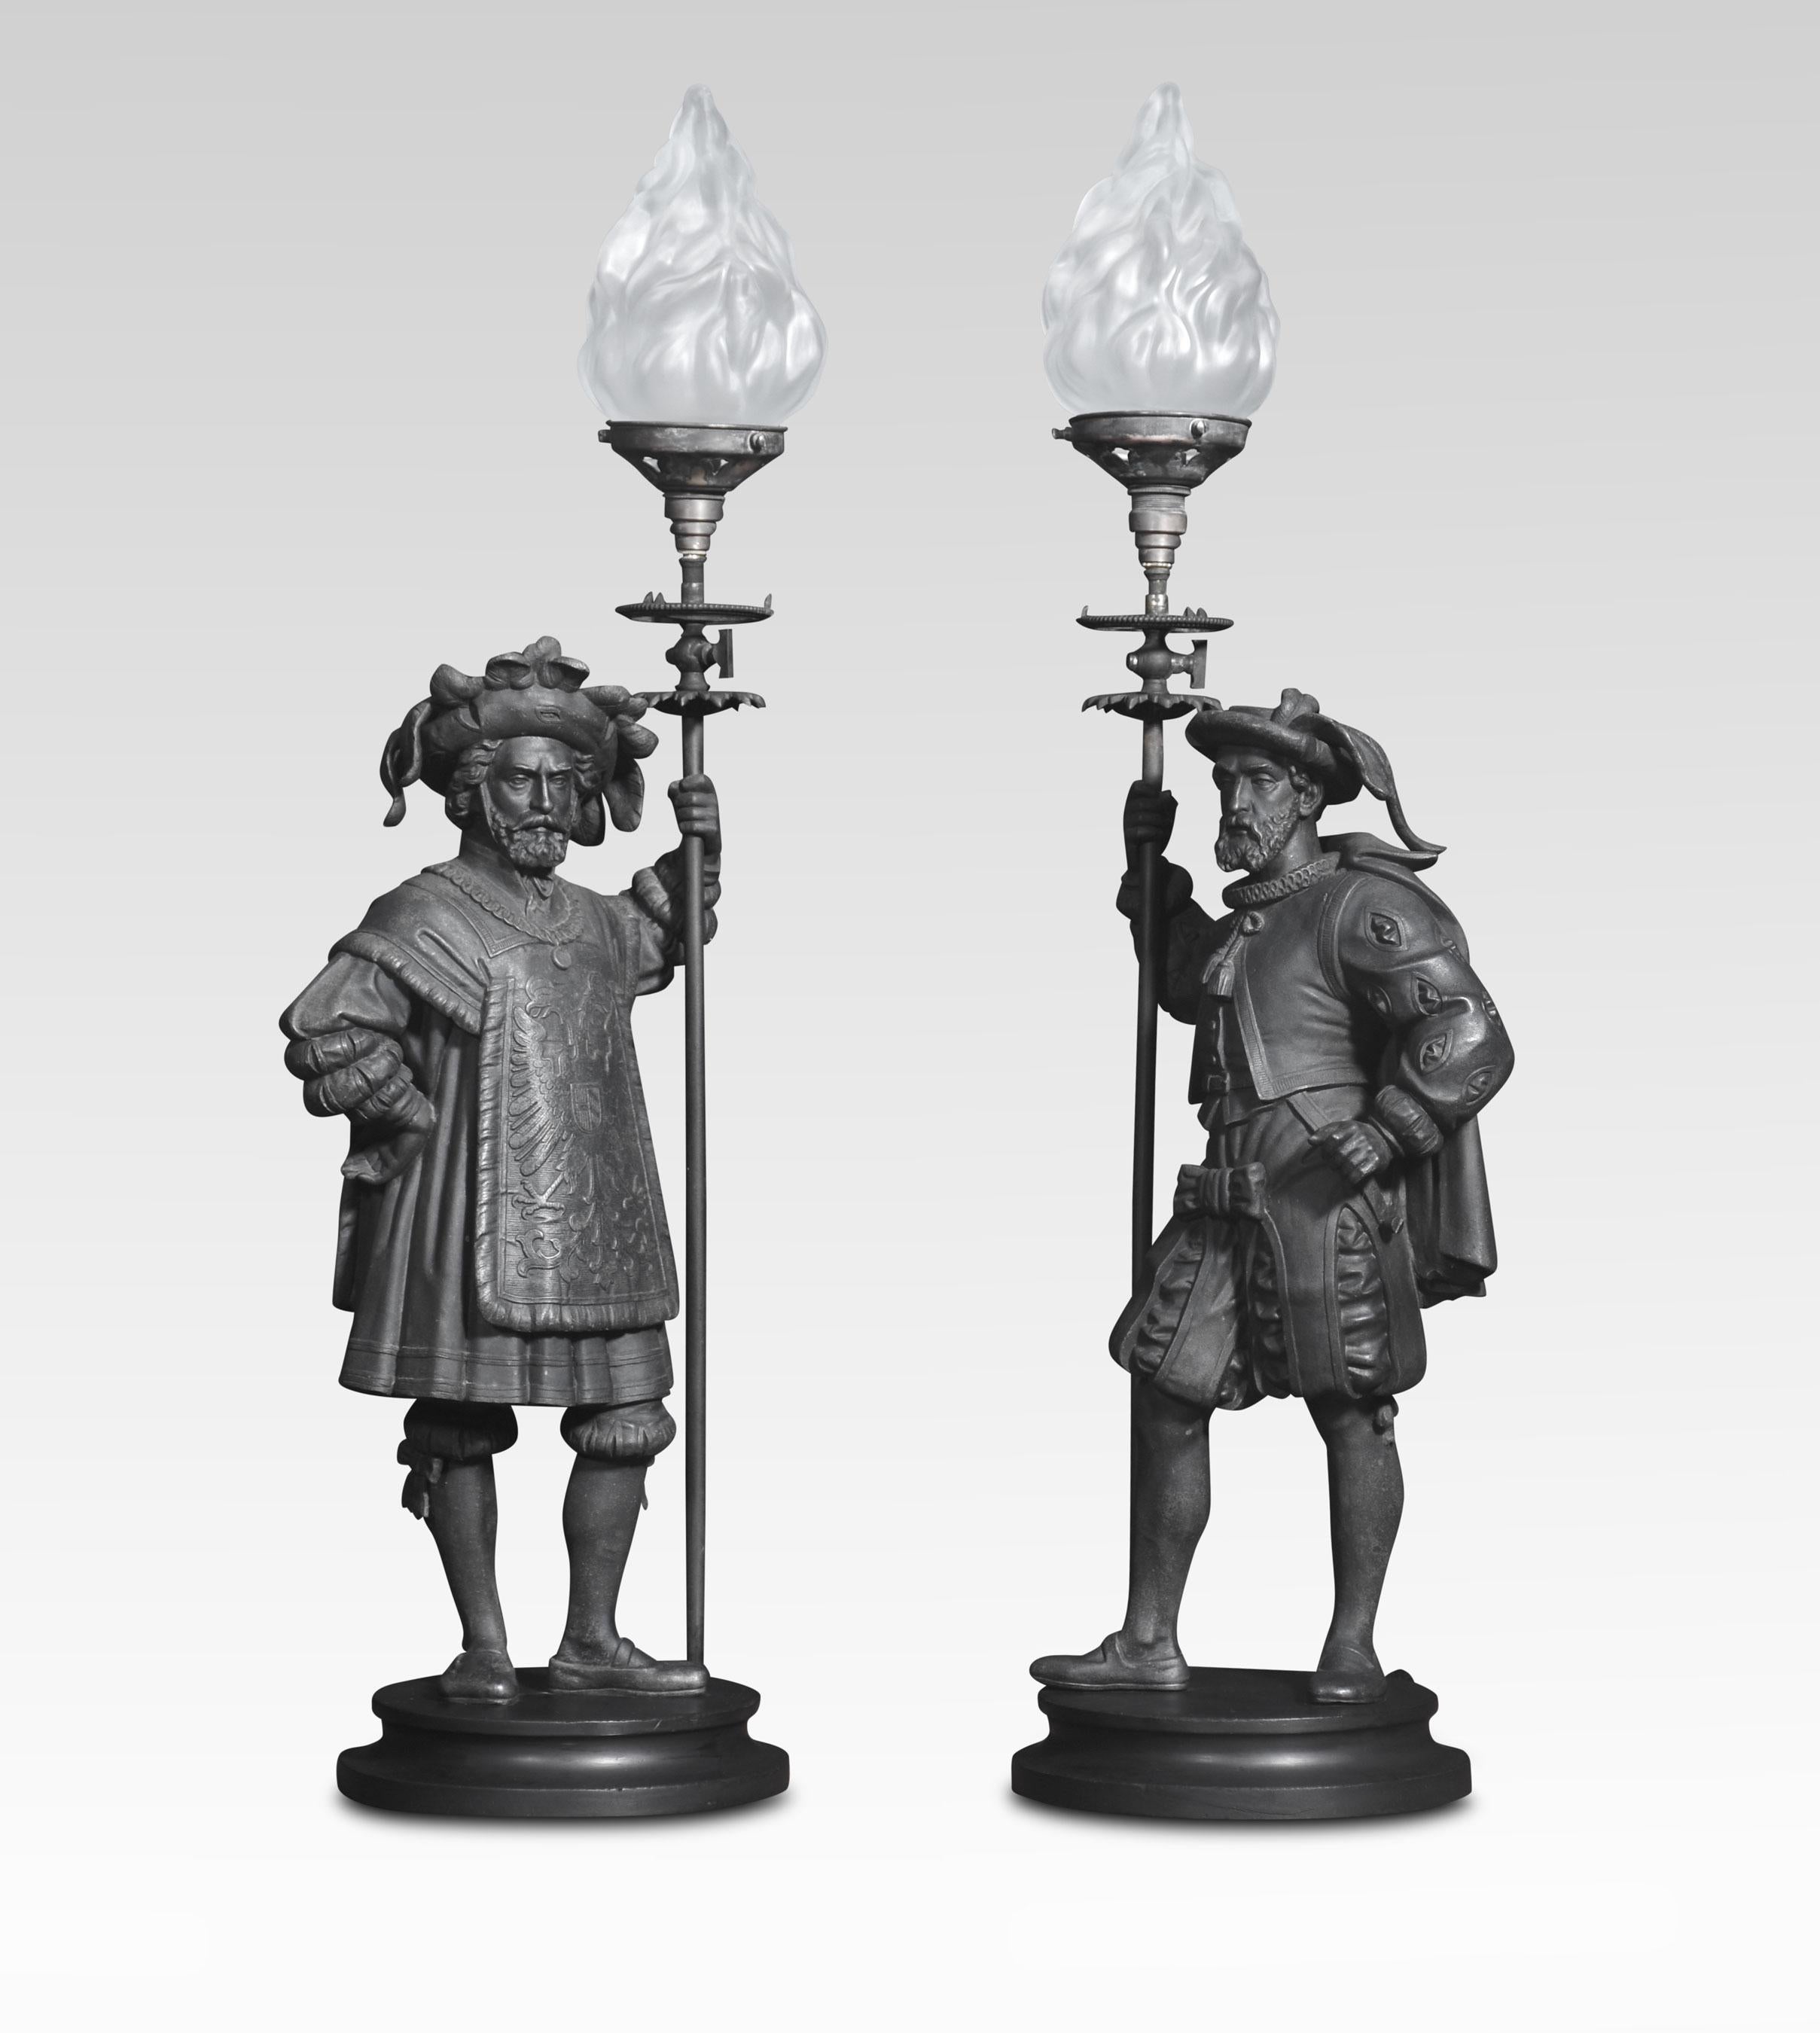 Pair of Spelter table lamps, in the form of medieval figures. Both clenching a flaming torch. Raised up on circular bases. The lamps have been converted to electricity and rewired and tested.
Dimensions
Height 32.5 Inches
Width 11.5 Inches
Depth 8.5